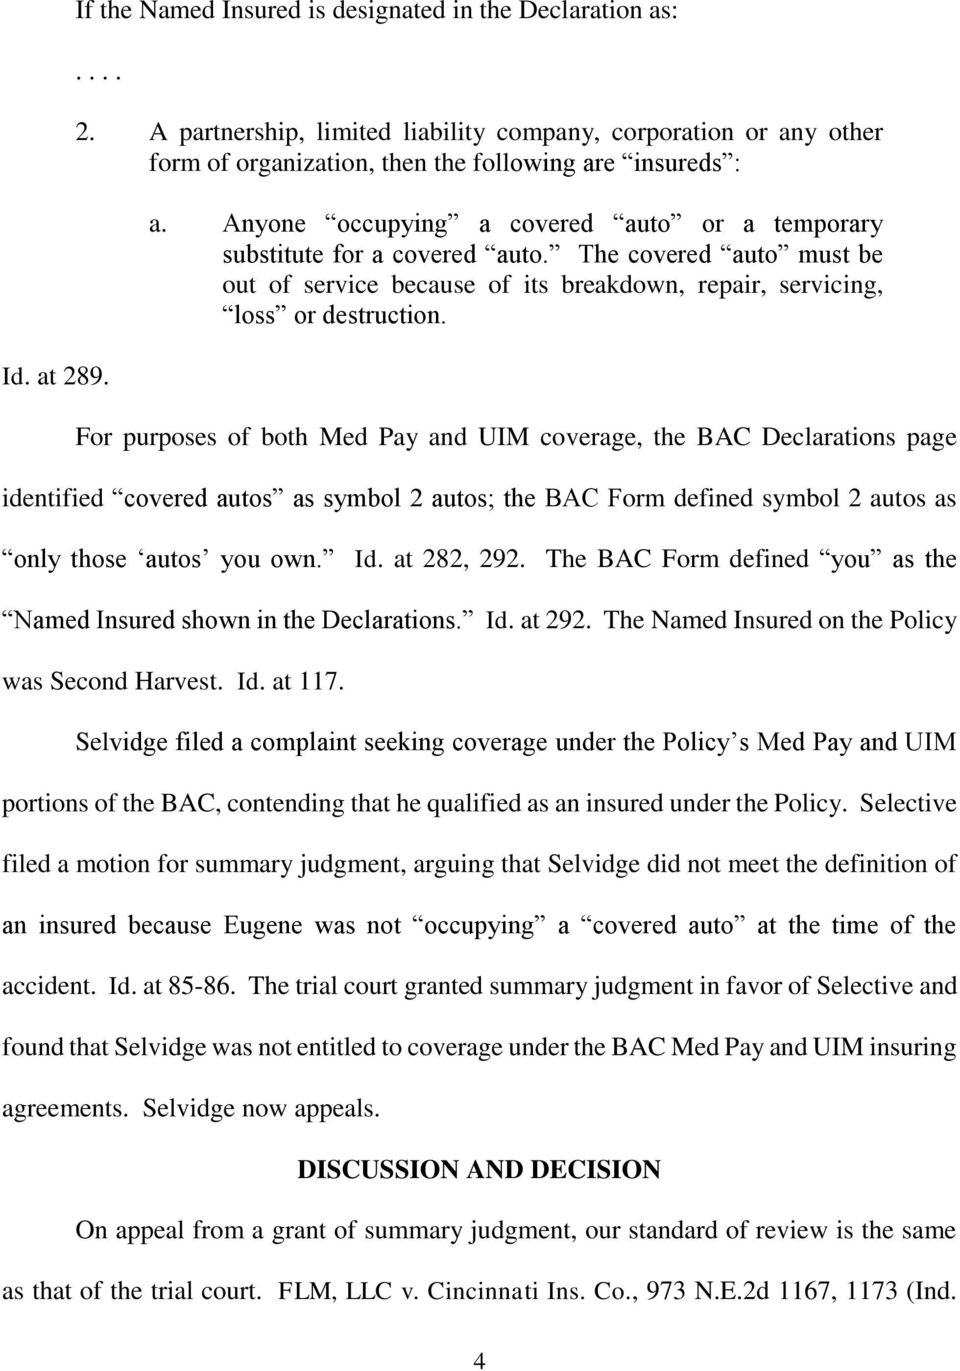 For purposes of both Med Pay and UIM coverage, the BAC Declarations page identified covered autos as symbol 2 autos; the BAC Form defined symbol 2 autos as only those autos you own. Id. at 282, 292.